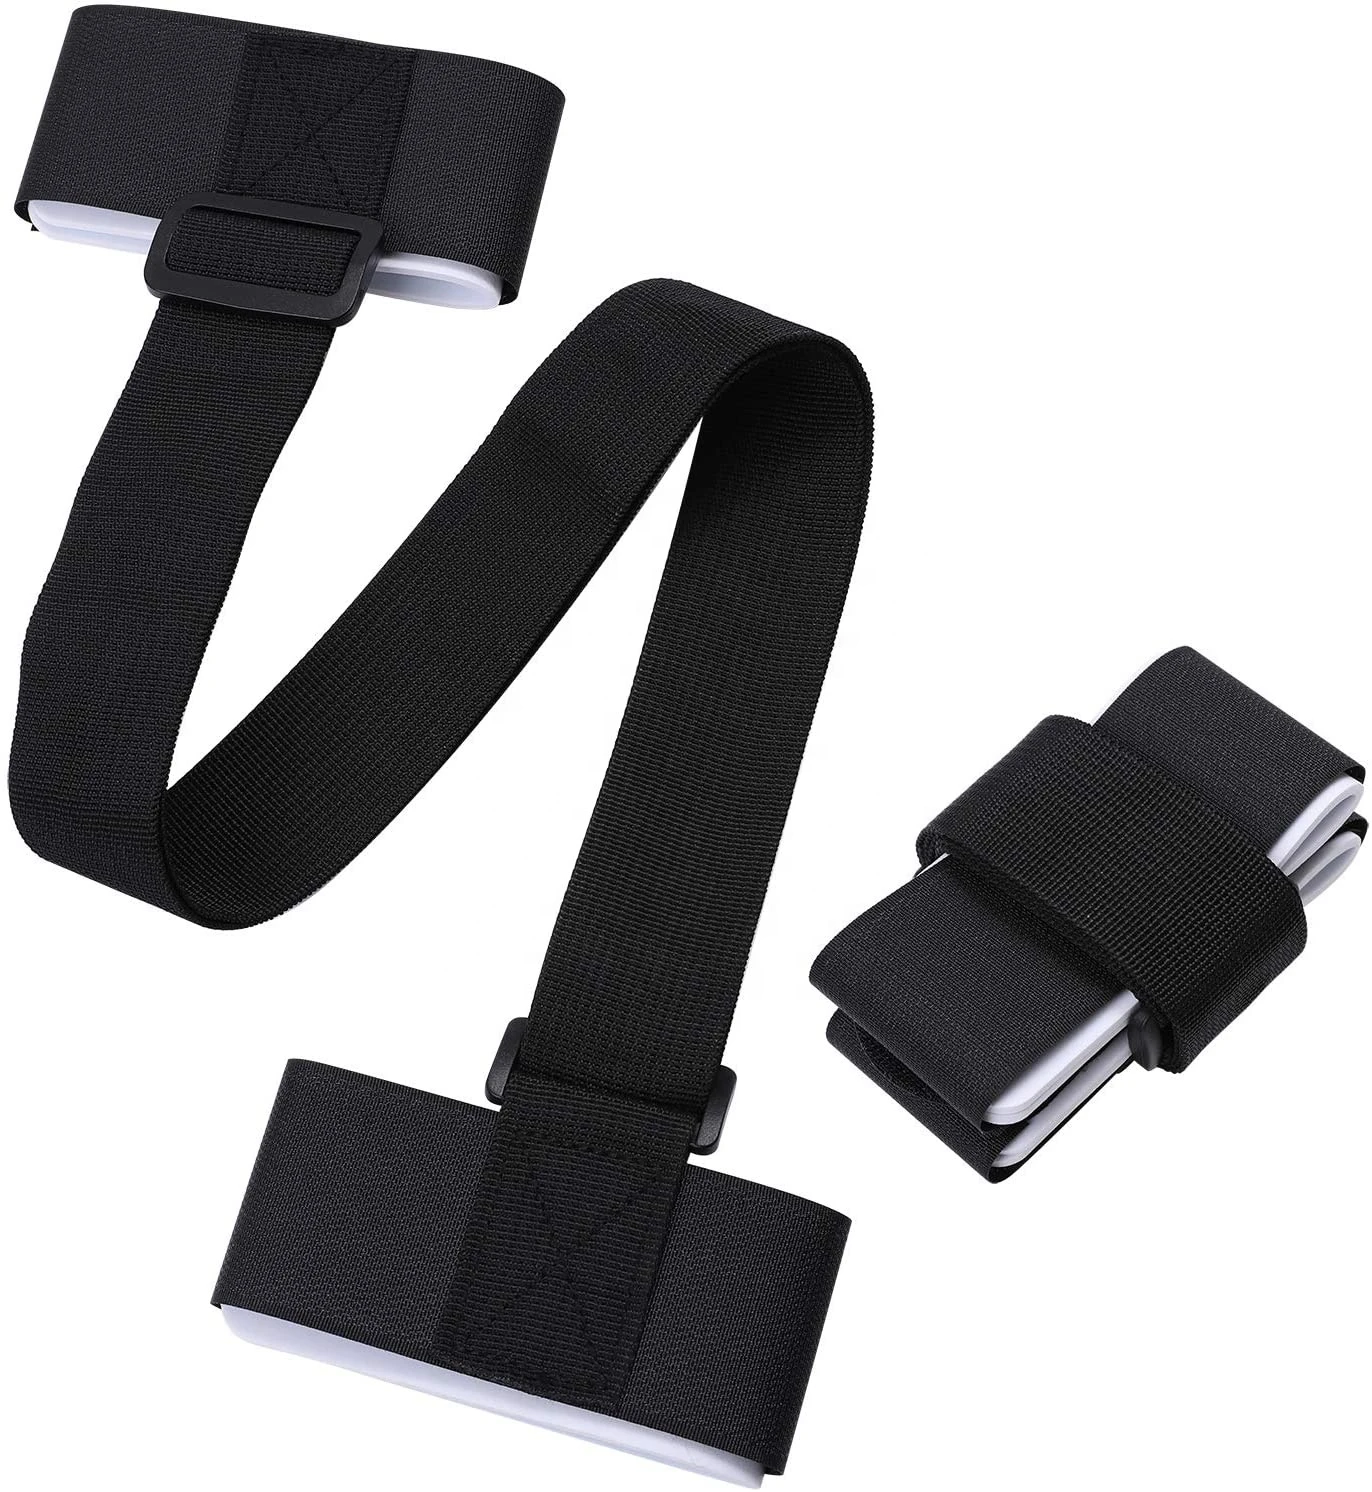 Ski Straps for Carrying Strap Shoulder Carrier Ski Accessory Snow Gear Lash Handle Thick and Strong Strap Closing and Cushioned